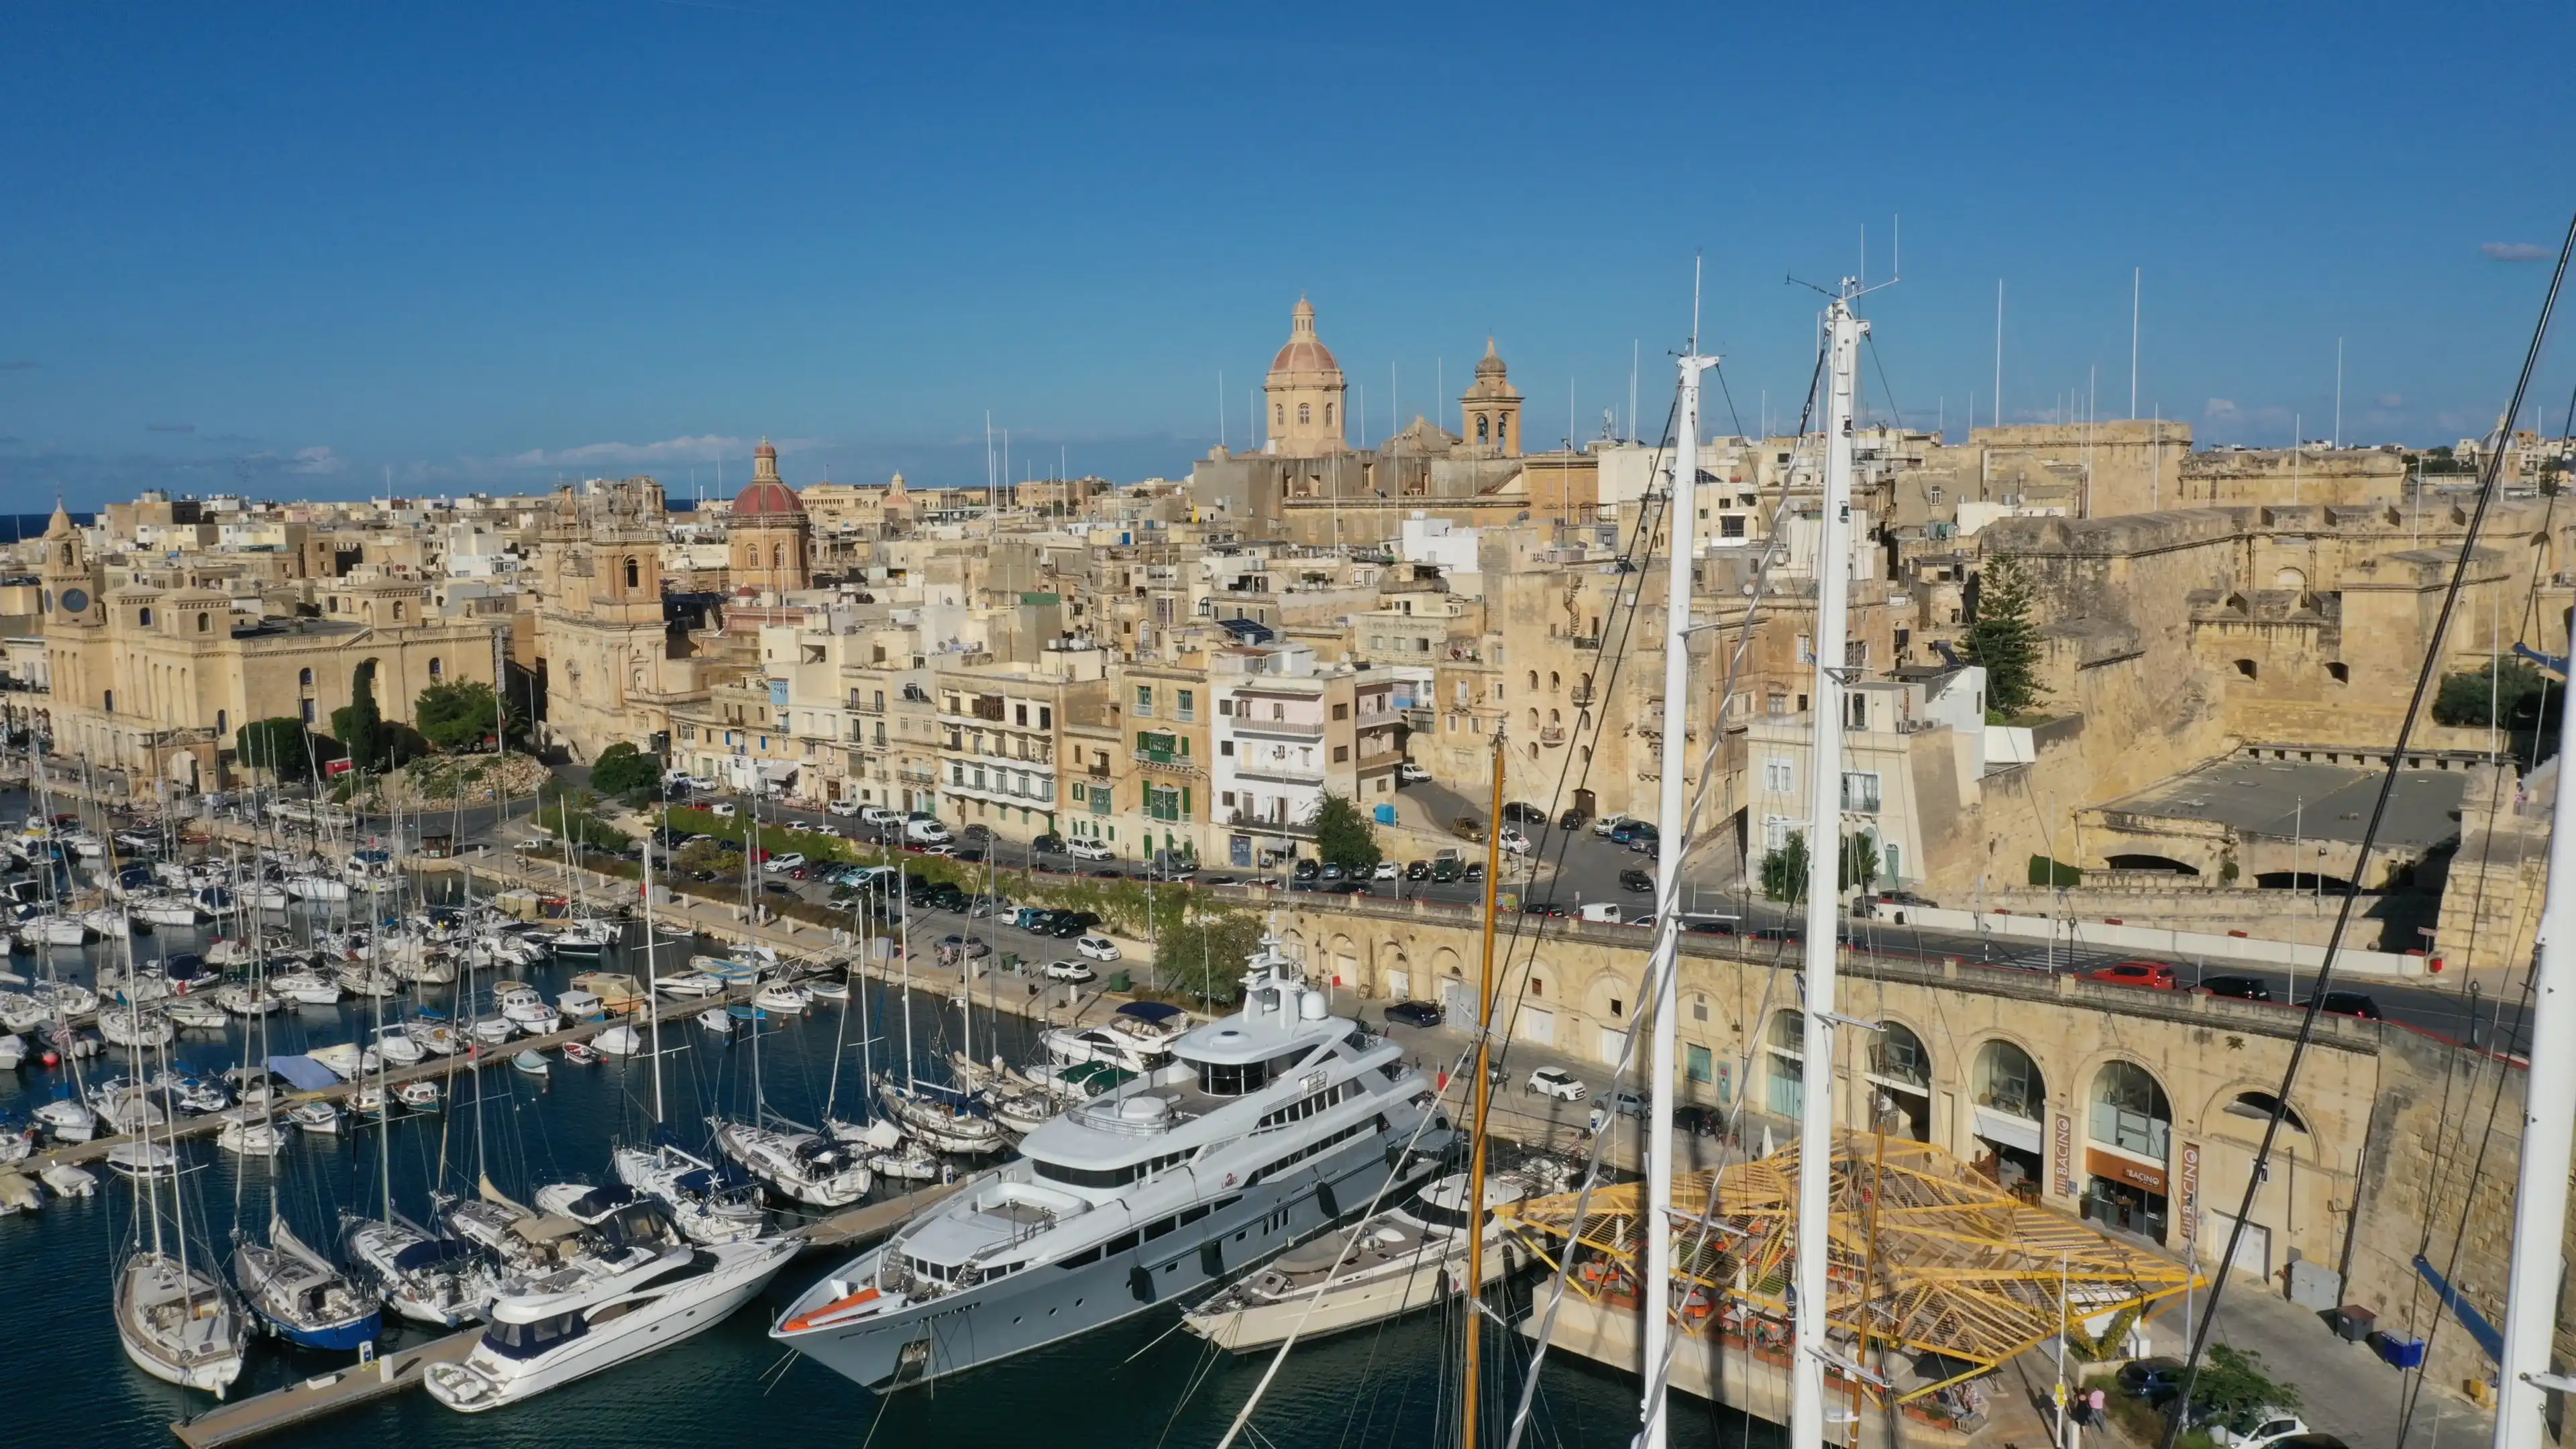 Aerial view of sailboats moored in harbour Senglea, Birgu, Bormla / Cospicua, Valletta, Malta. Ancient architecture of old town: christian orthodox churches, cathedrals, basilicas. Sunny summer travel